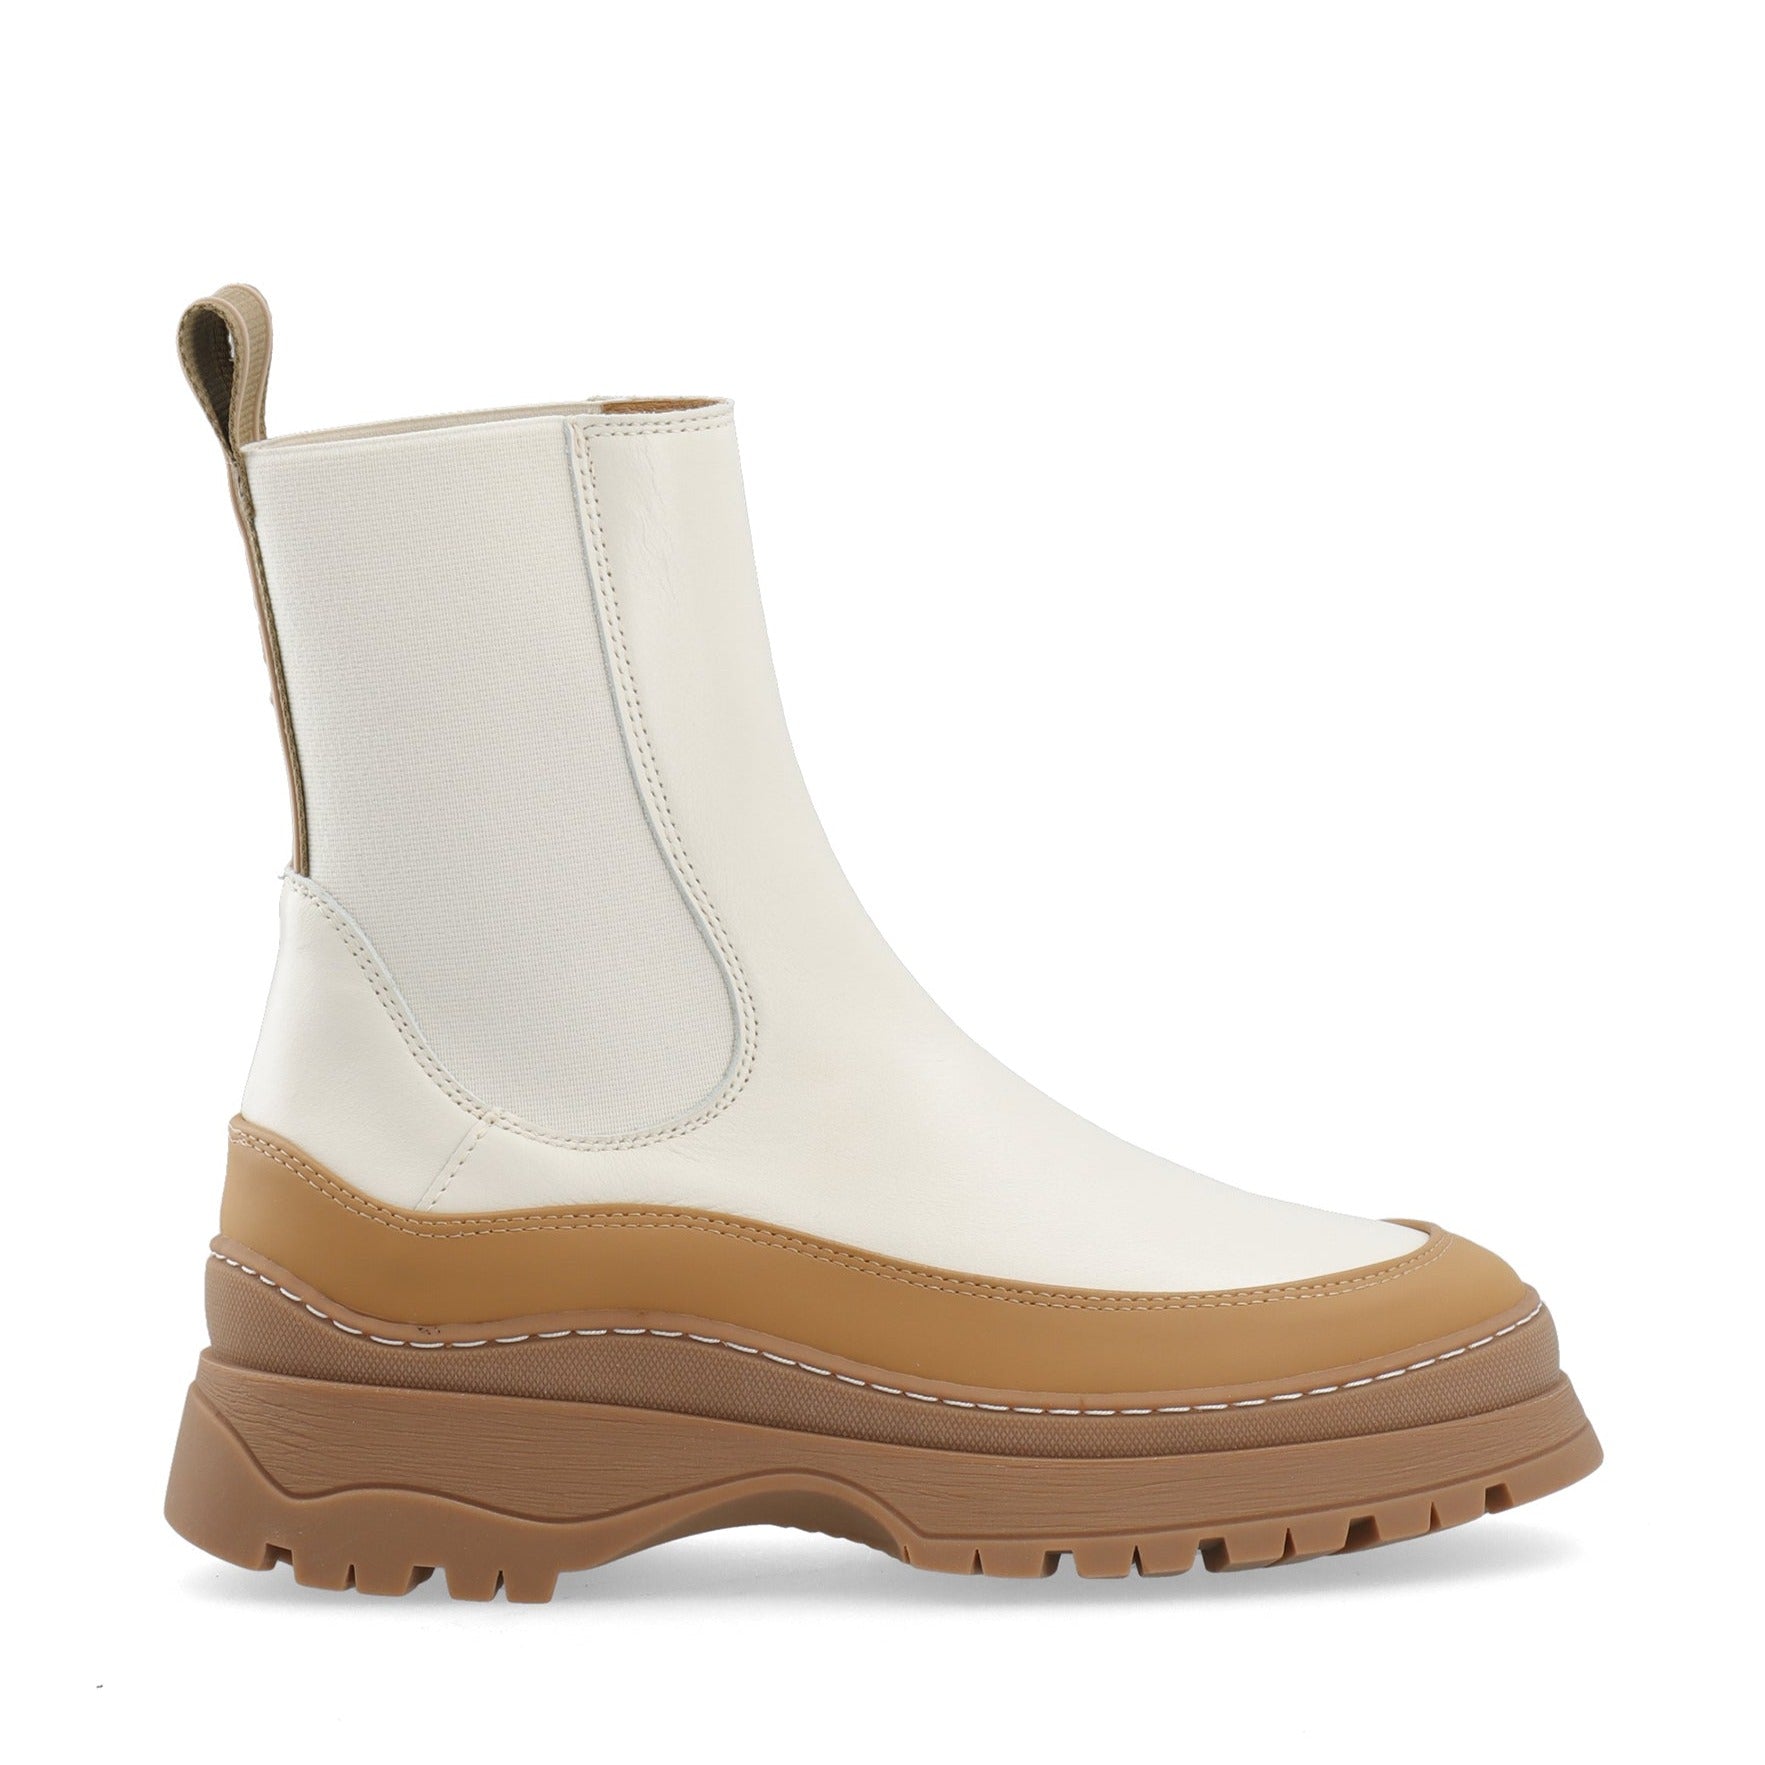 LÄST Dawson Chelsea Boot Ankle Boots Off White